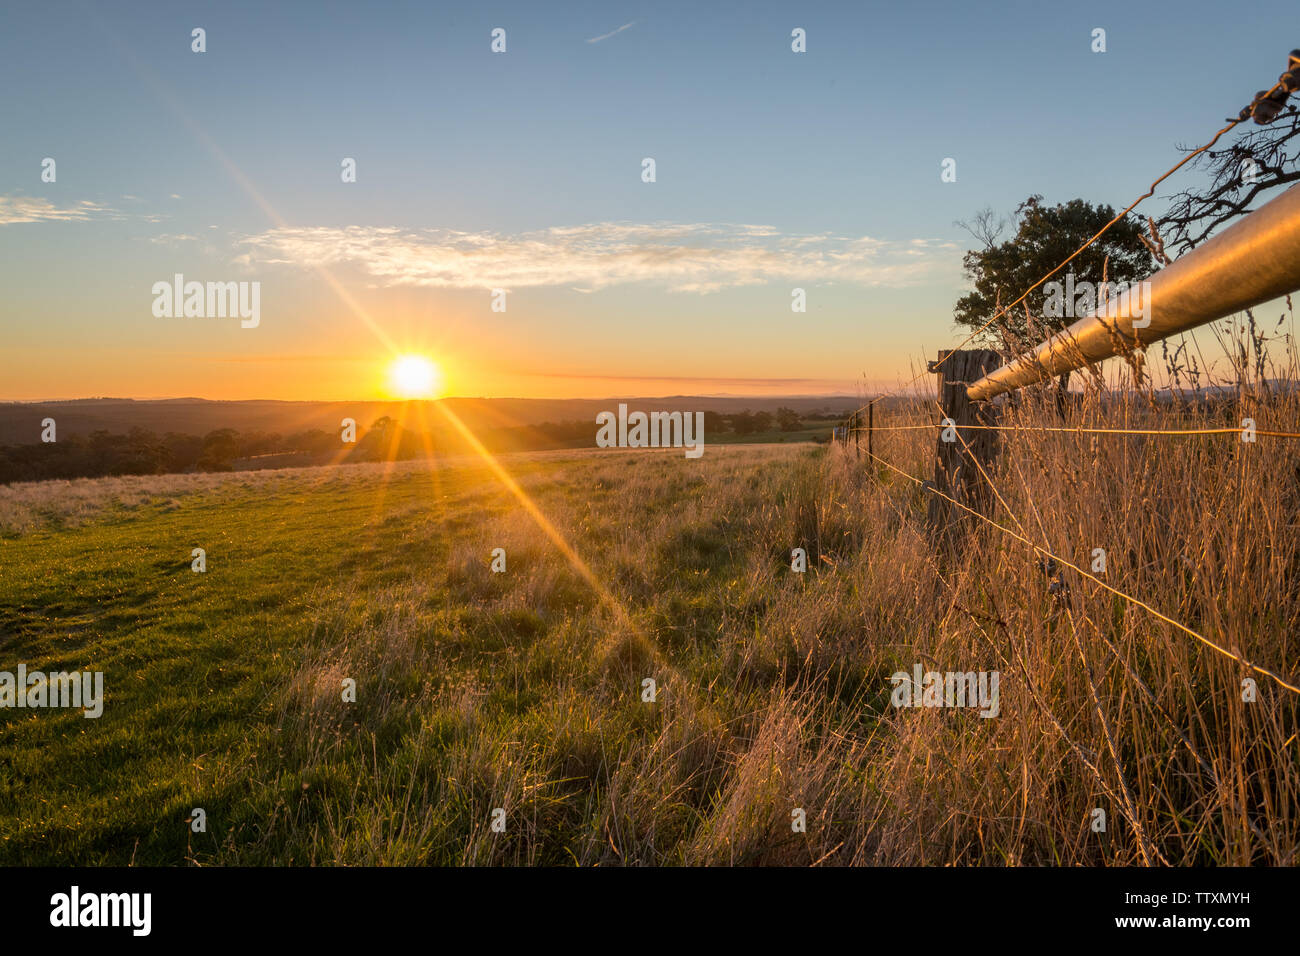 Yellow Sun setting in the distance over hills and paddocks with a farm fence framing the image Stock Photo